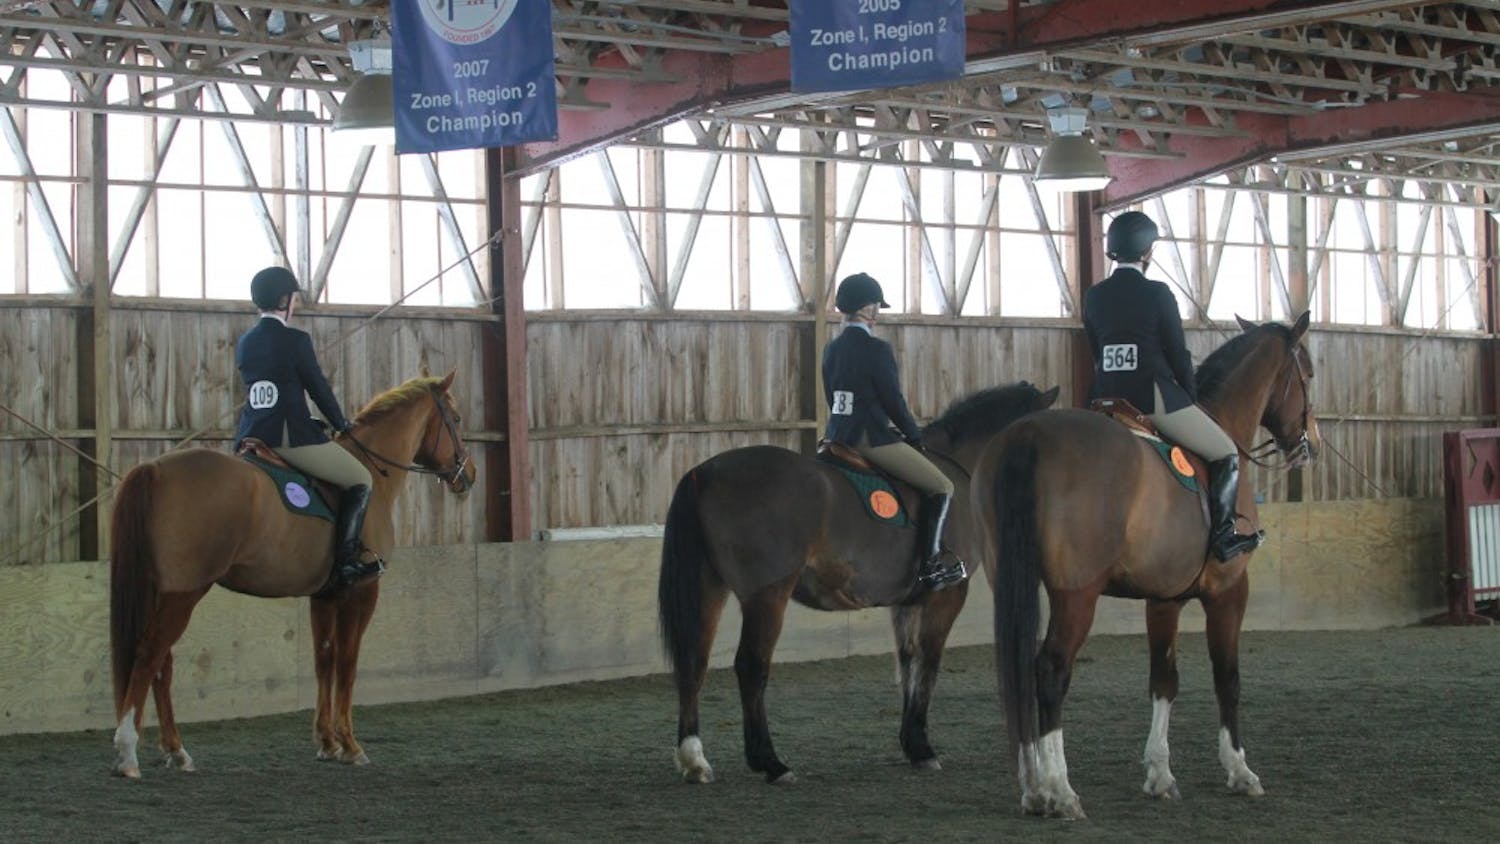 The Dartmouth Equestrian team officially became a women's varsity team in 2015 (photo from 2011).&nbsp;